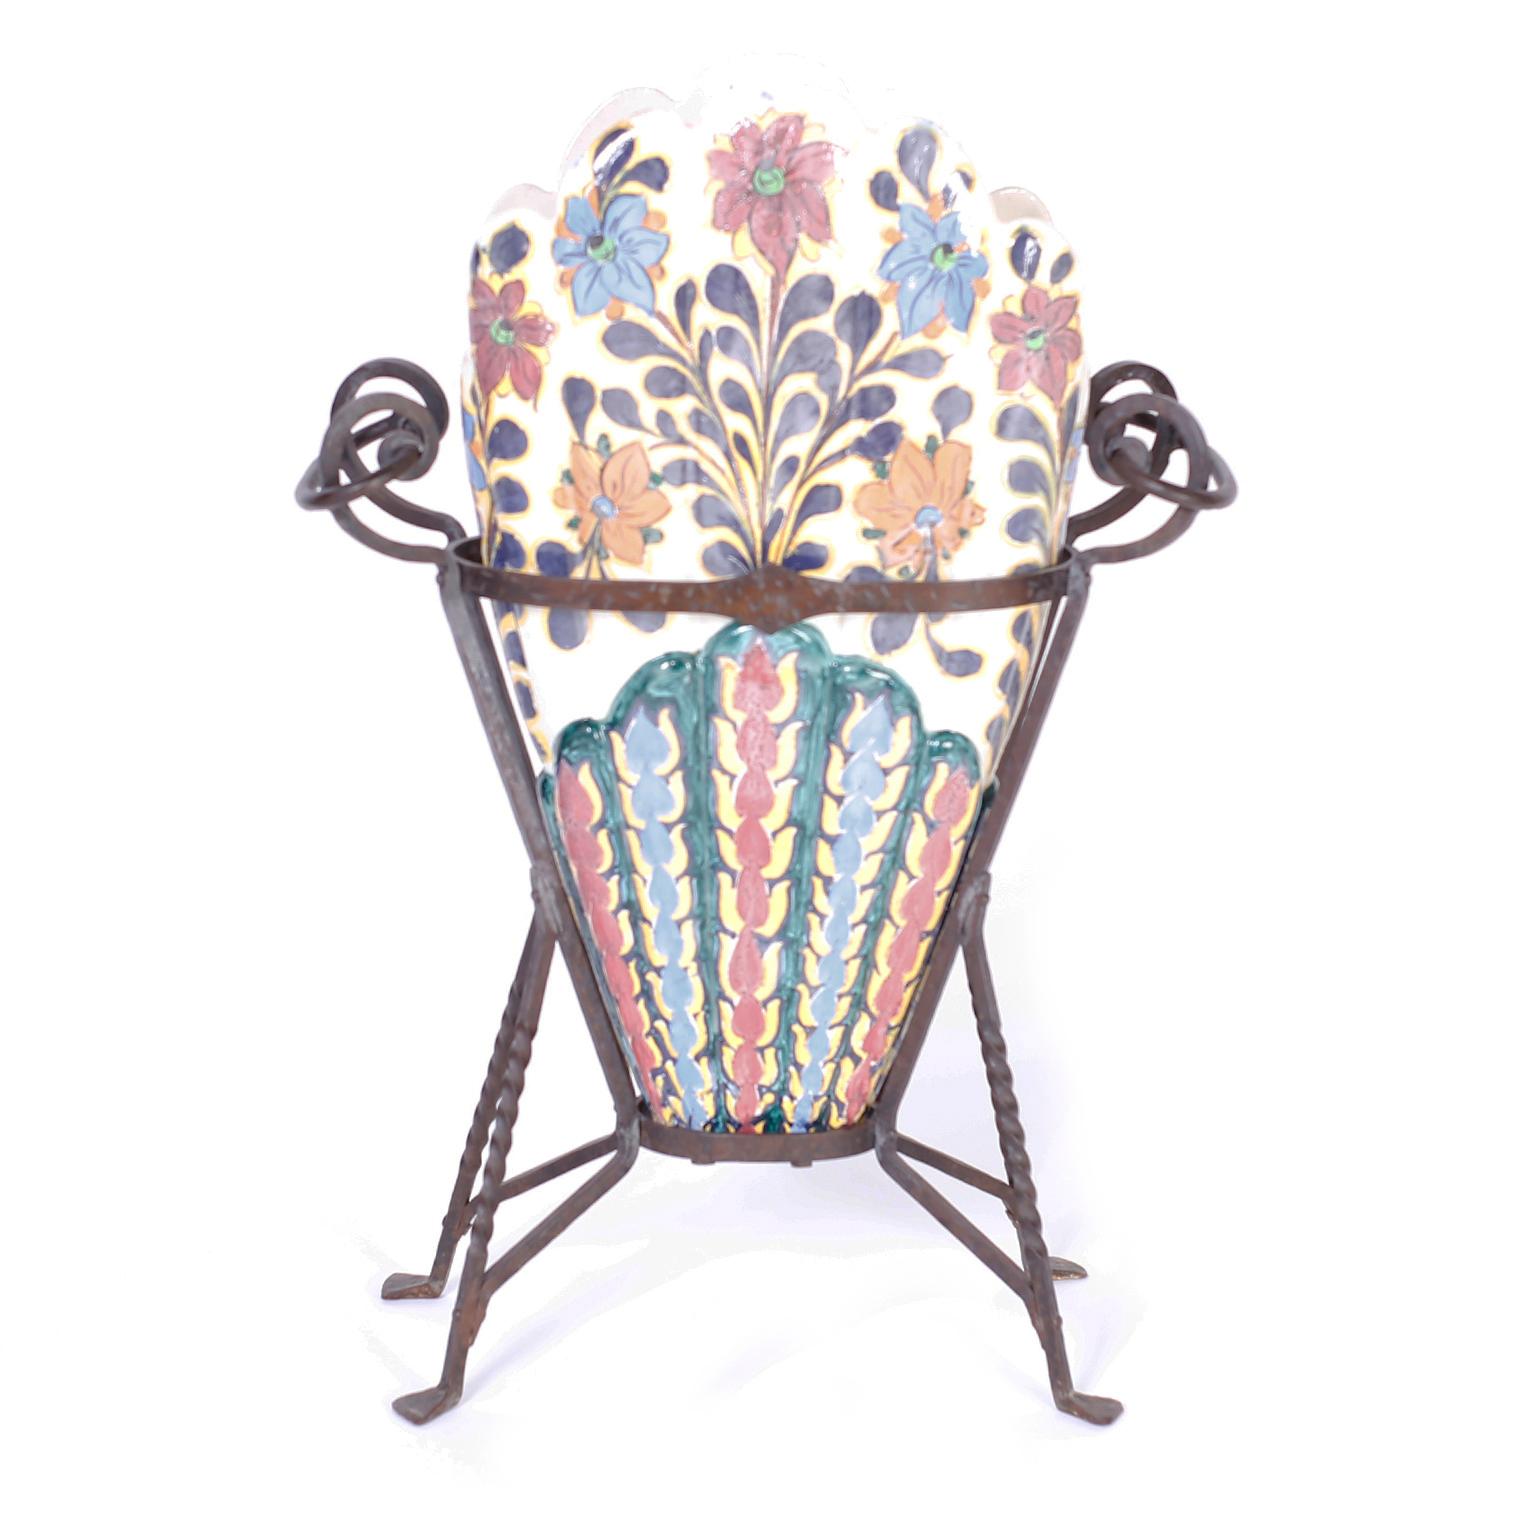 Italian umbrella stand crafted in terra cotta, decorated with flowers and glazed with three compartments and set in a hand wrought iron stand with dramatic handles.